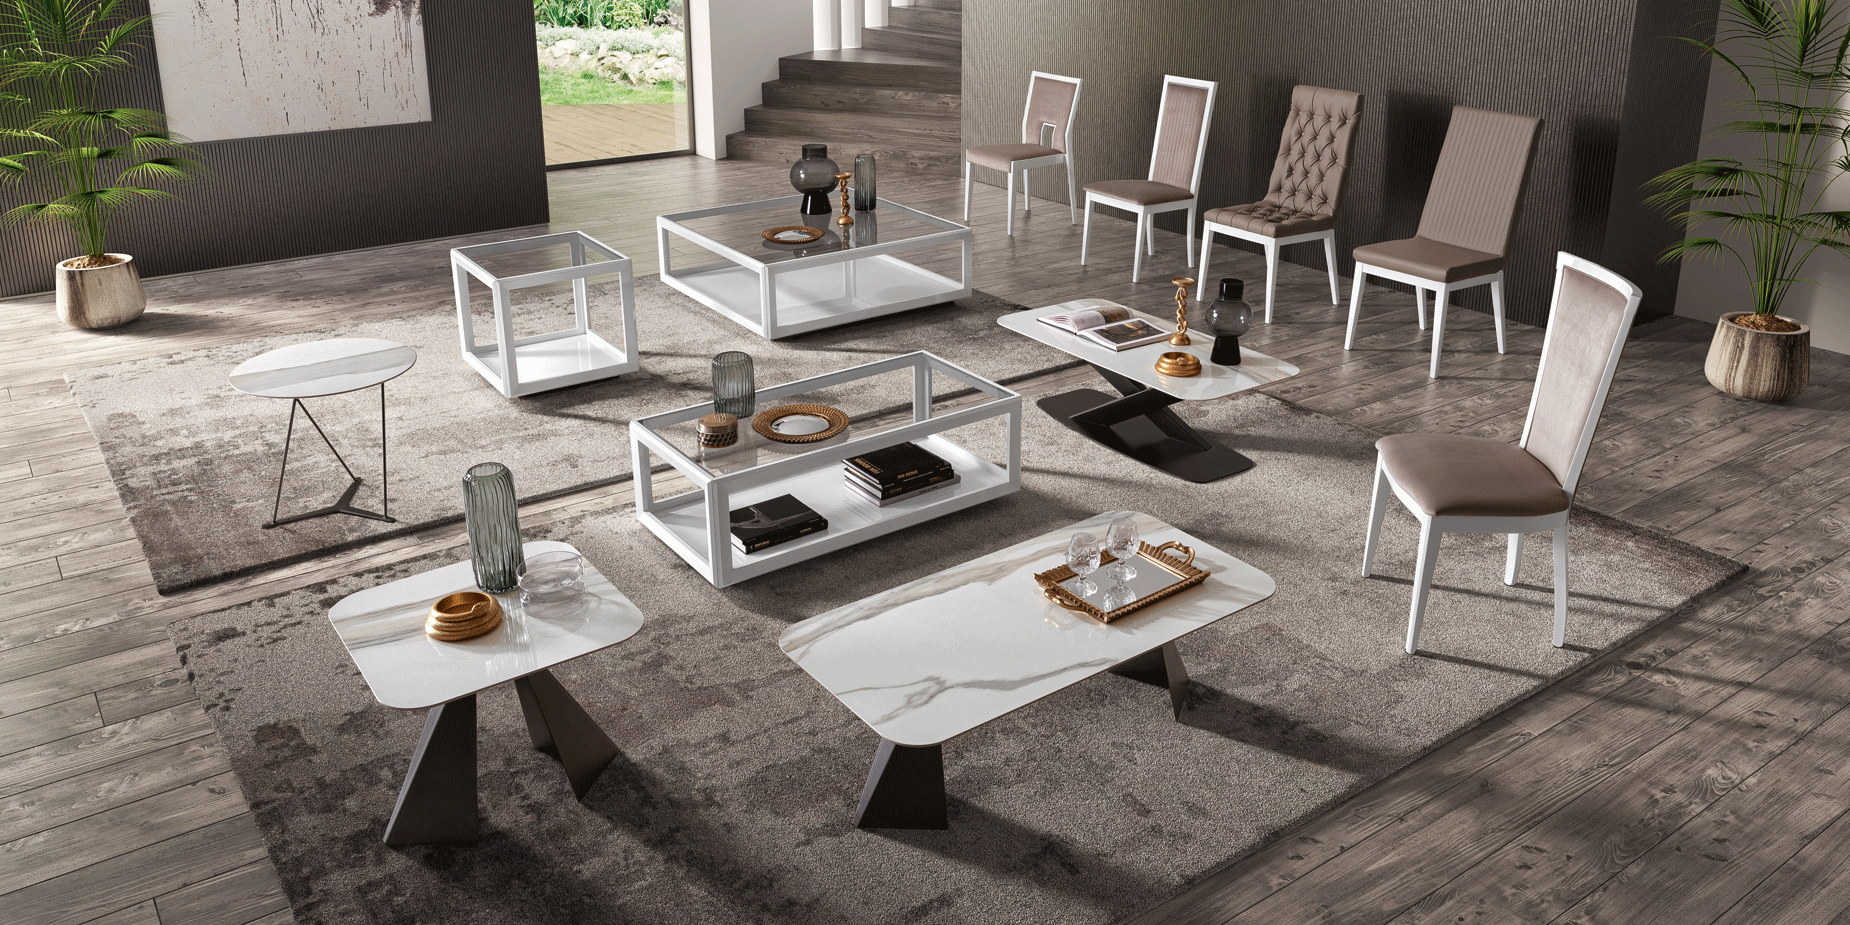 Dining Room Furniture Marble-Look Tables Elite WHITE Dining room Additional items